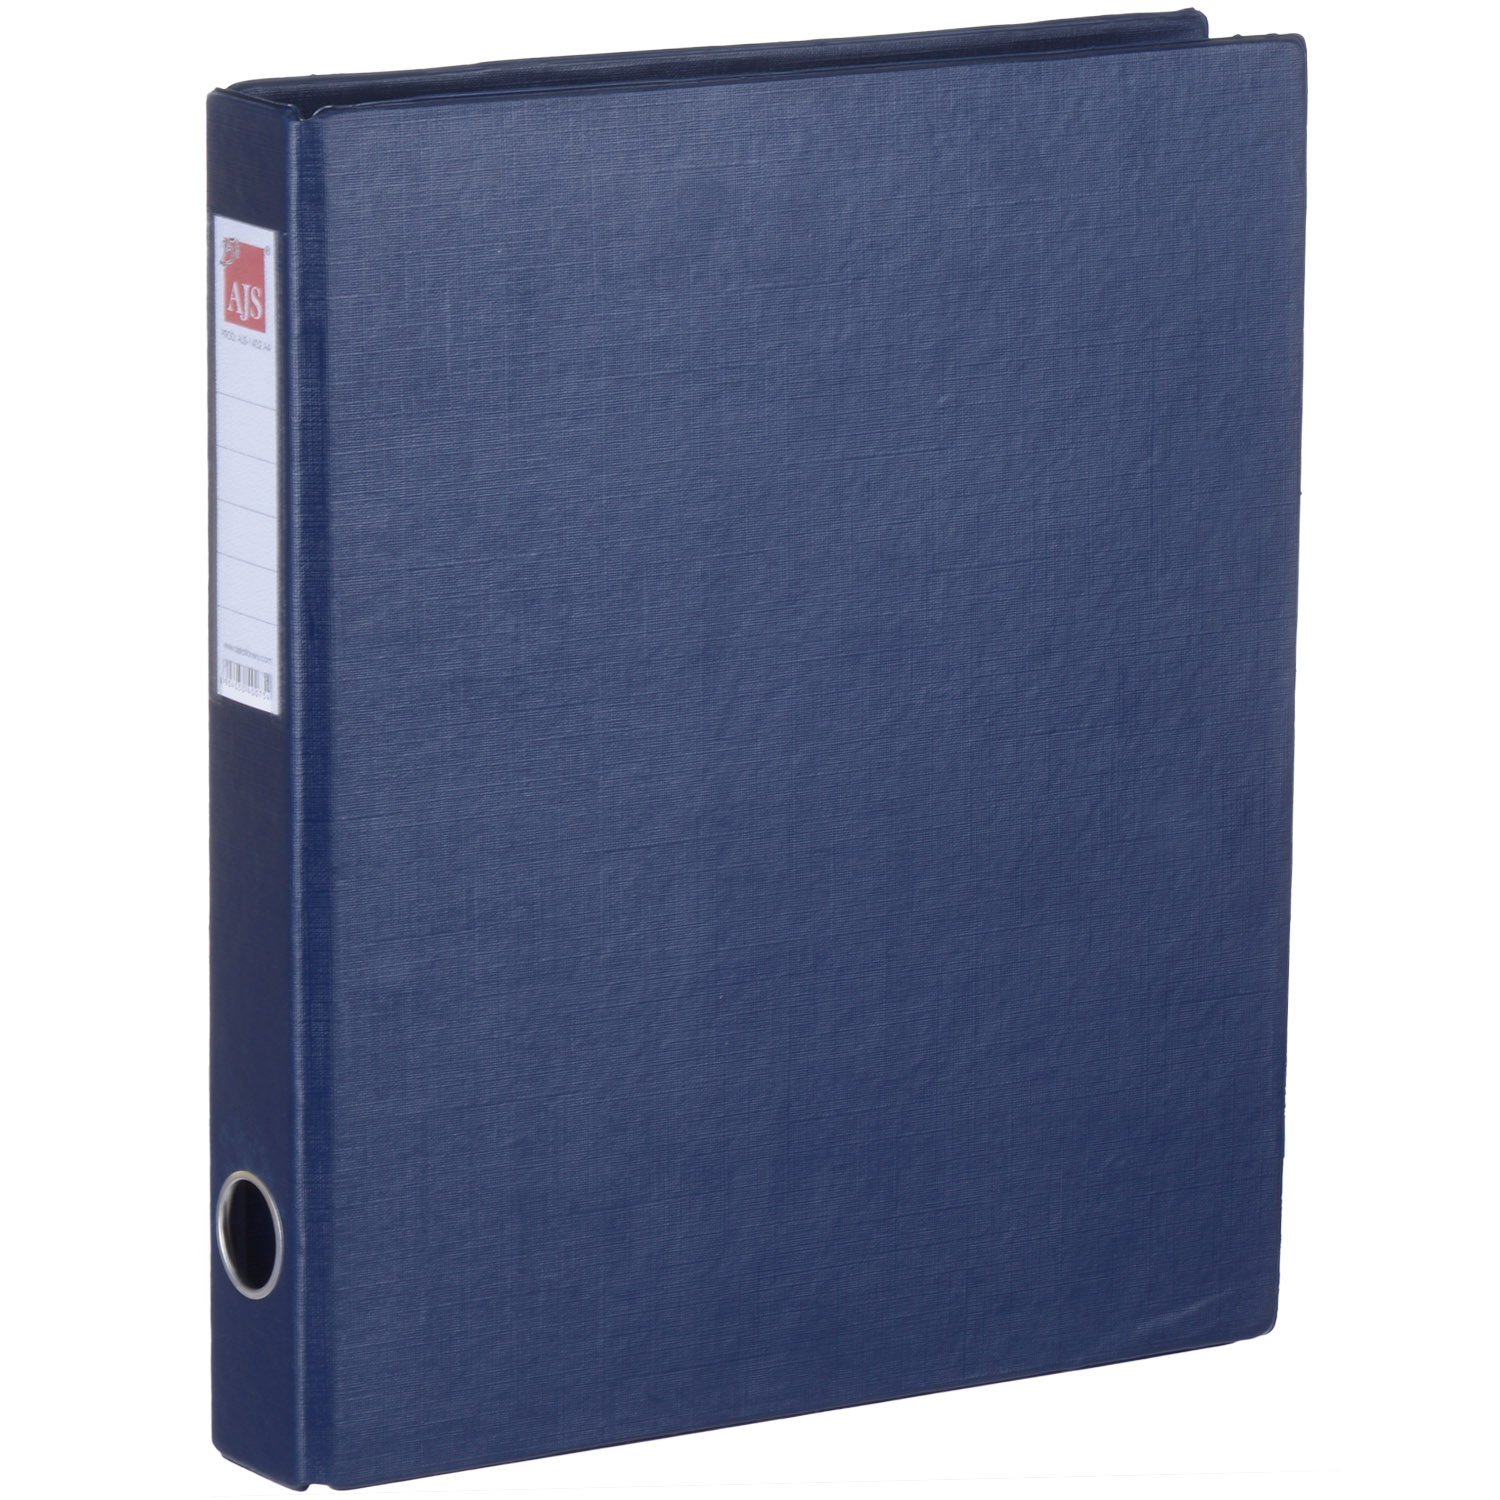 2D Ring Red Binder File in Lucknow at best price by Prachi Plastic Industry  - Justdial